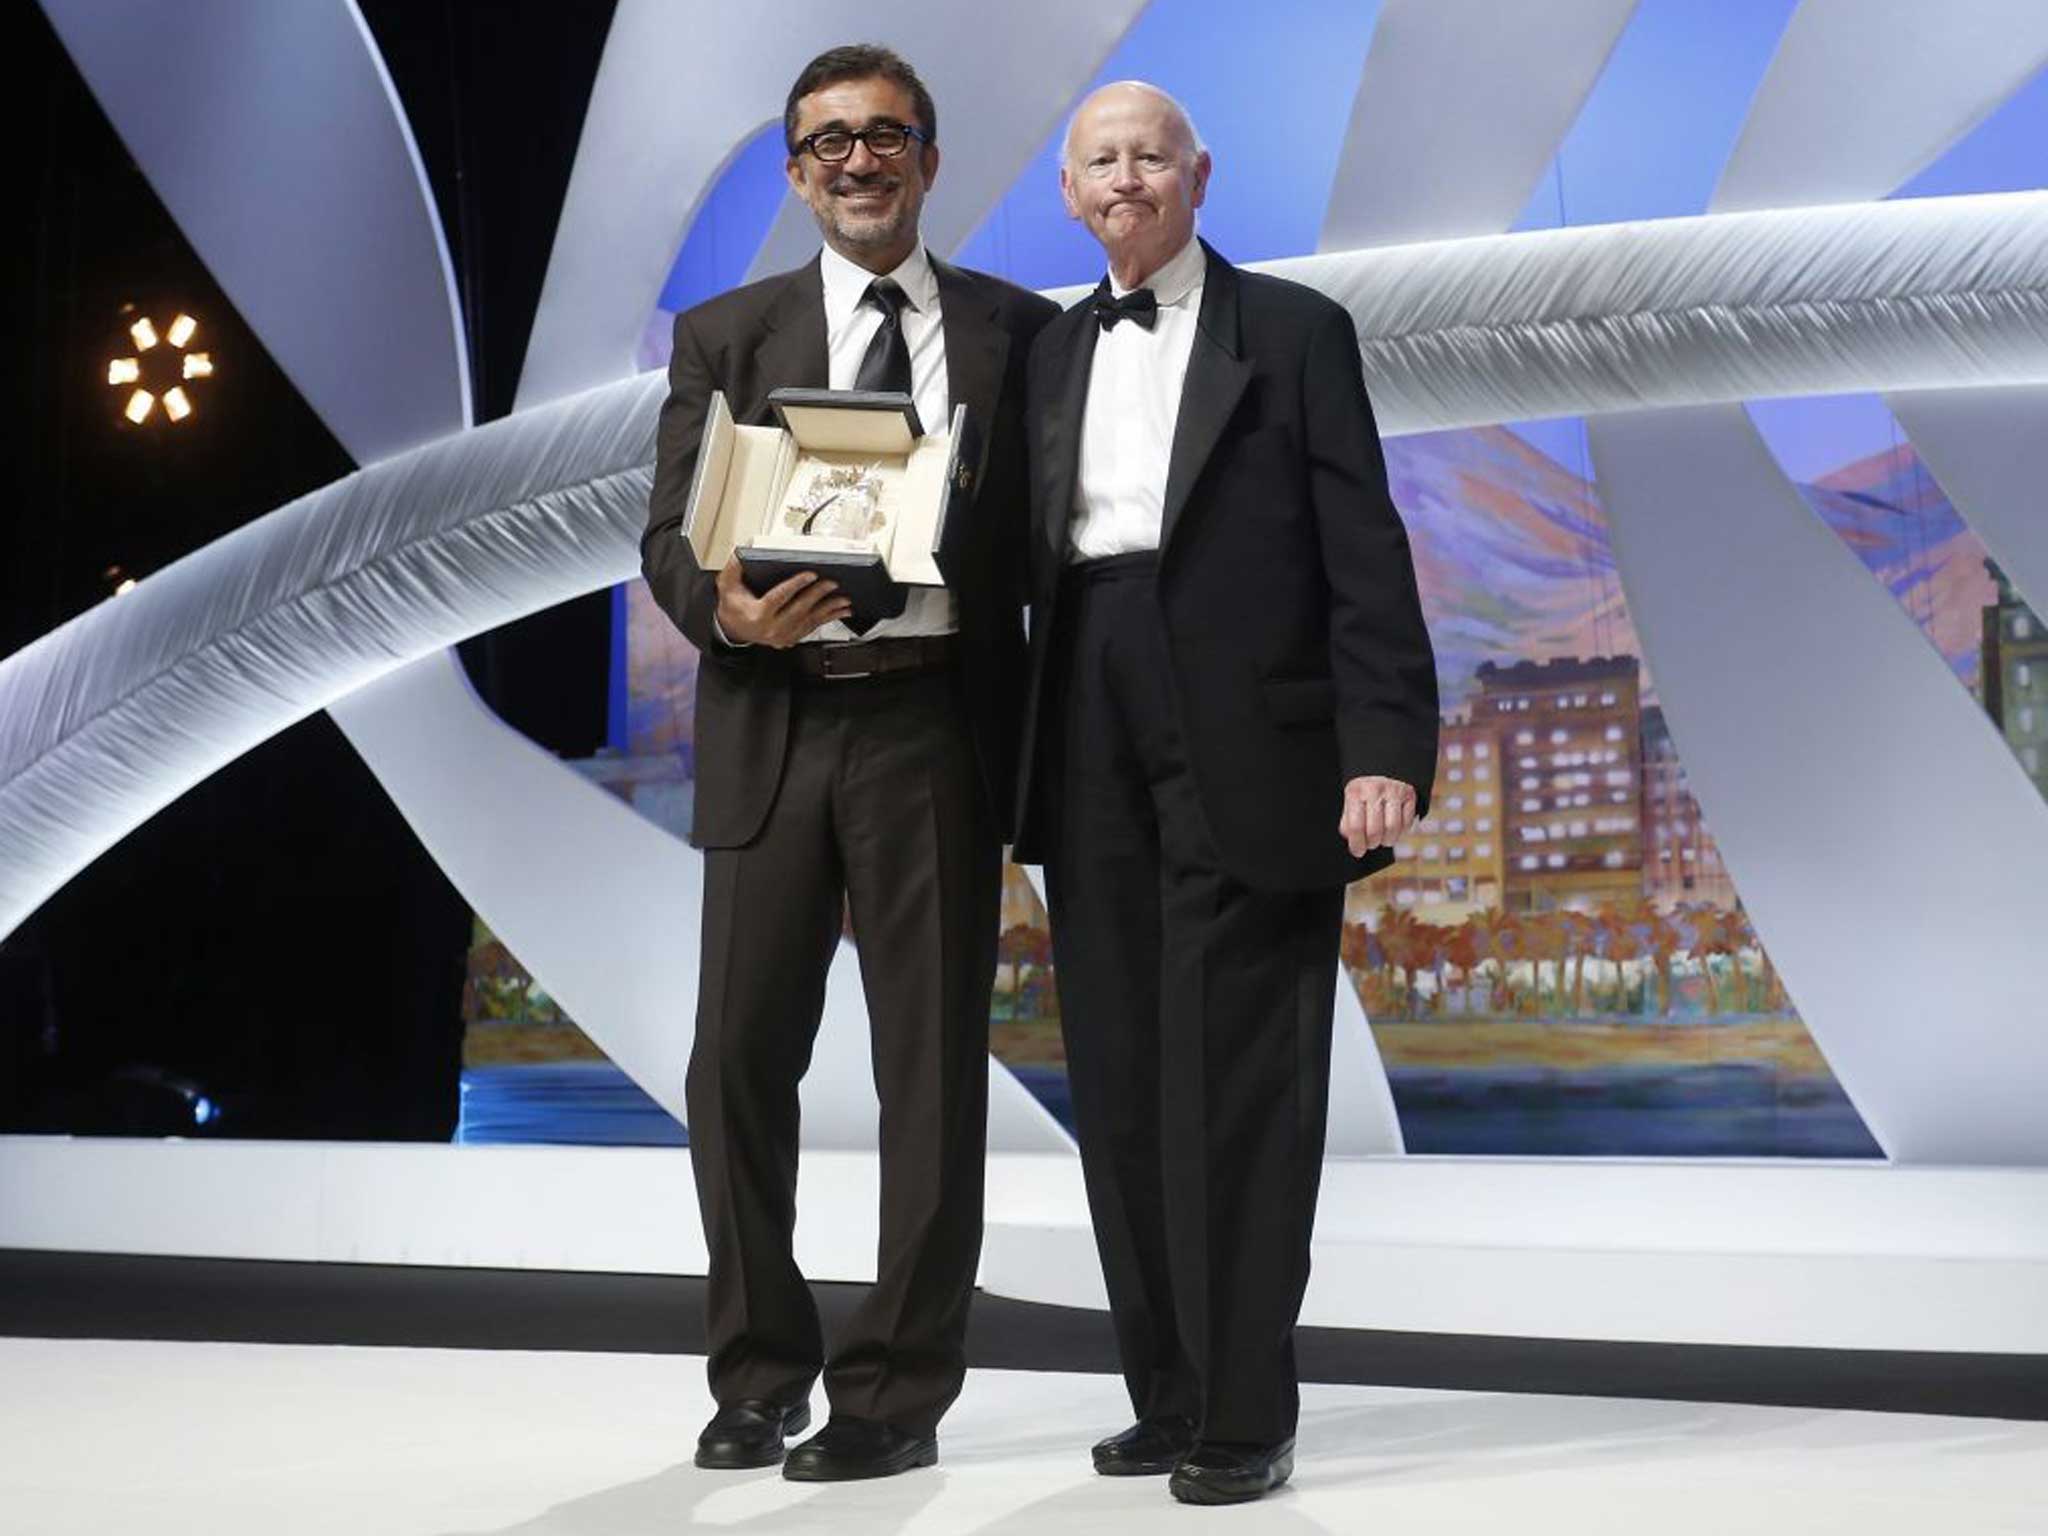 Turkish director Nuri Bilge Ceylan (L) poses with Festival President Gilles Jacob (R) after winning the Palme d'Or